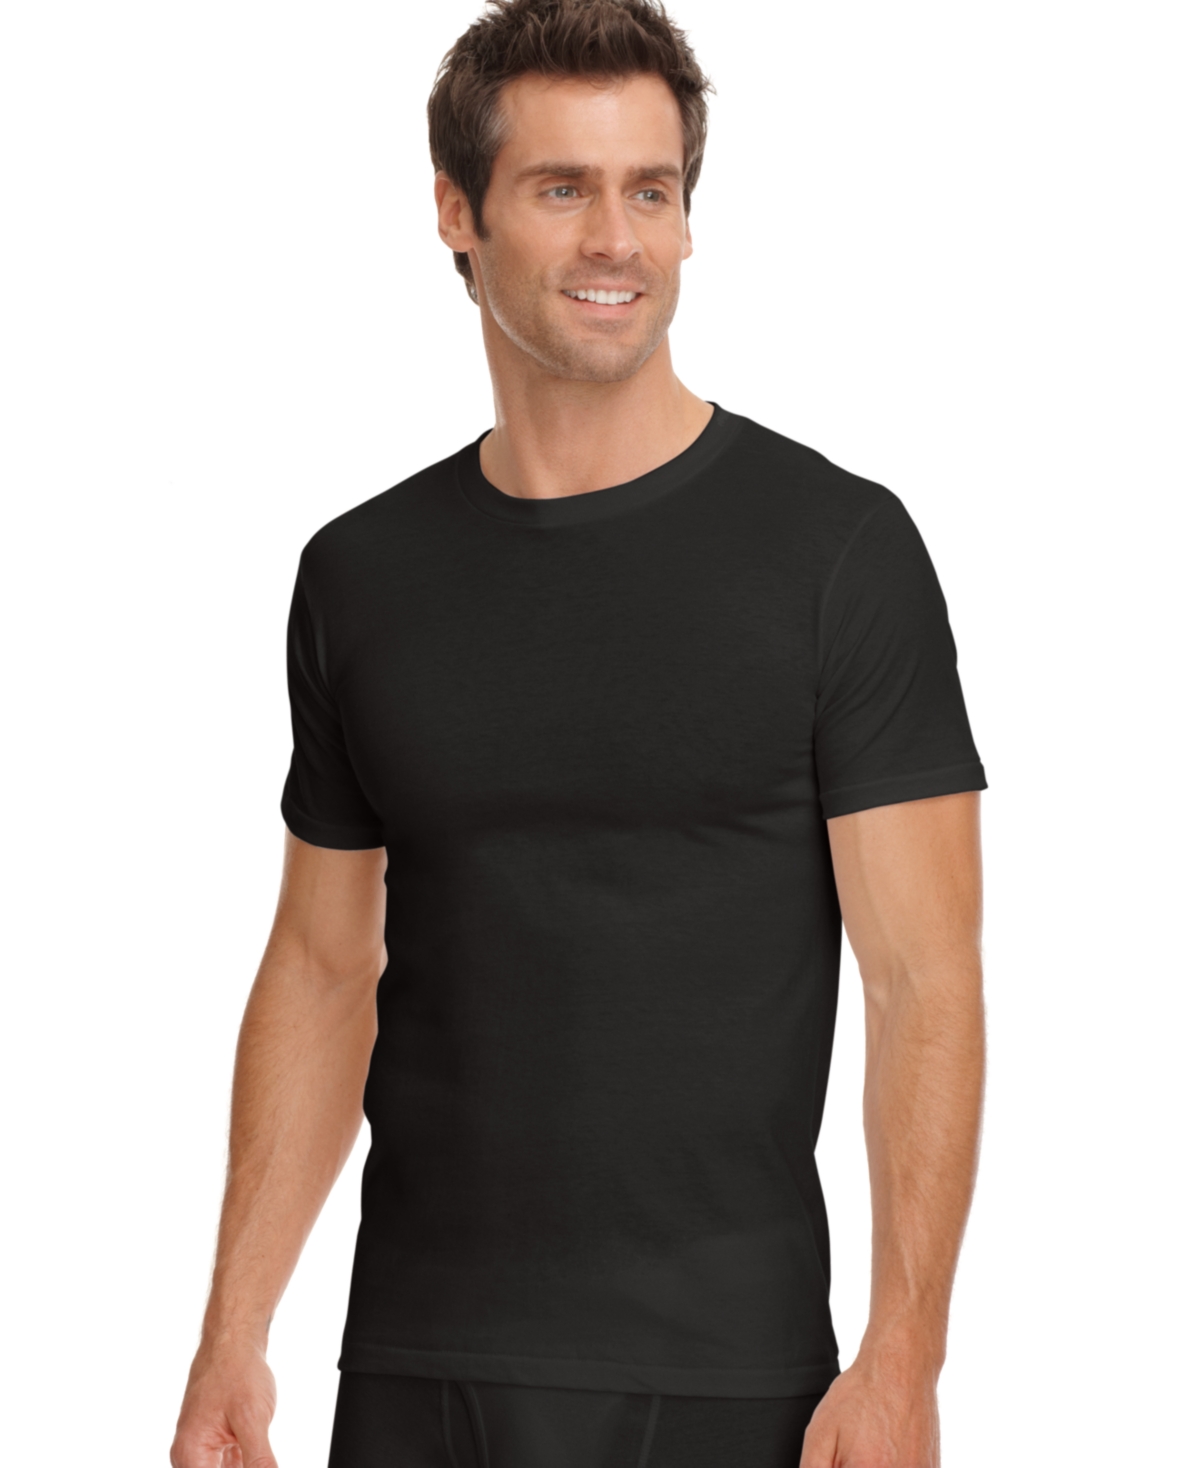 Men's Big and Tall Classic Crew Neck Undershirts, Pack of 2 - Black